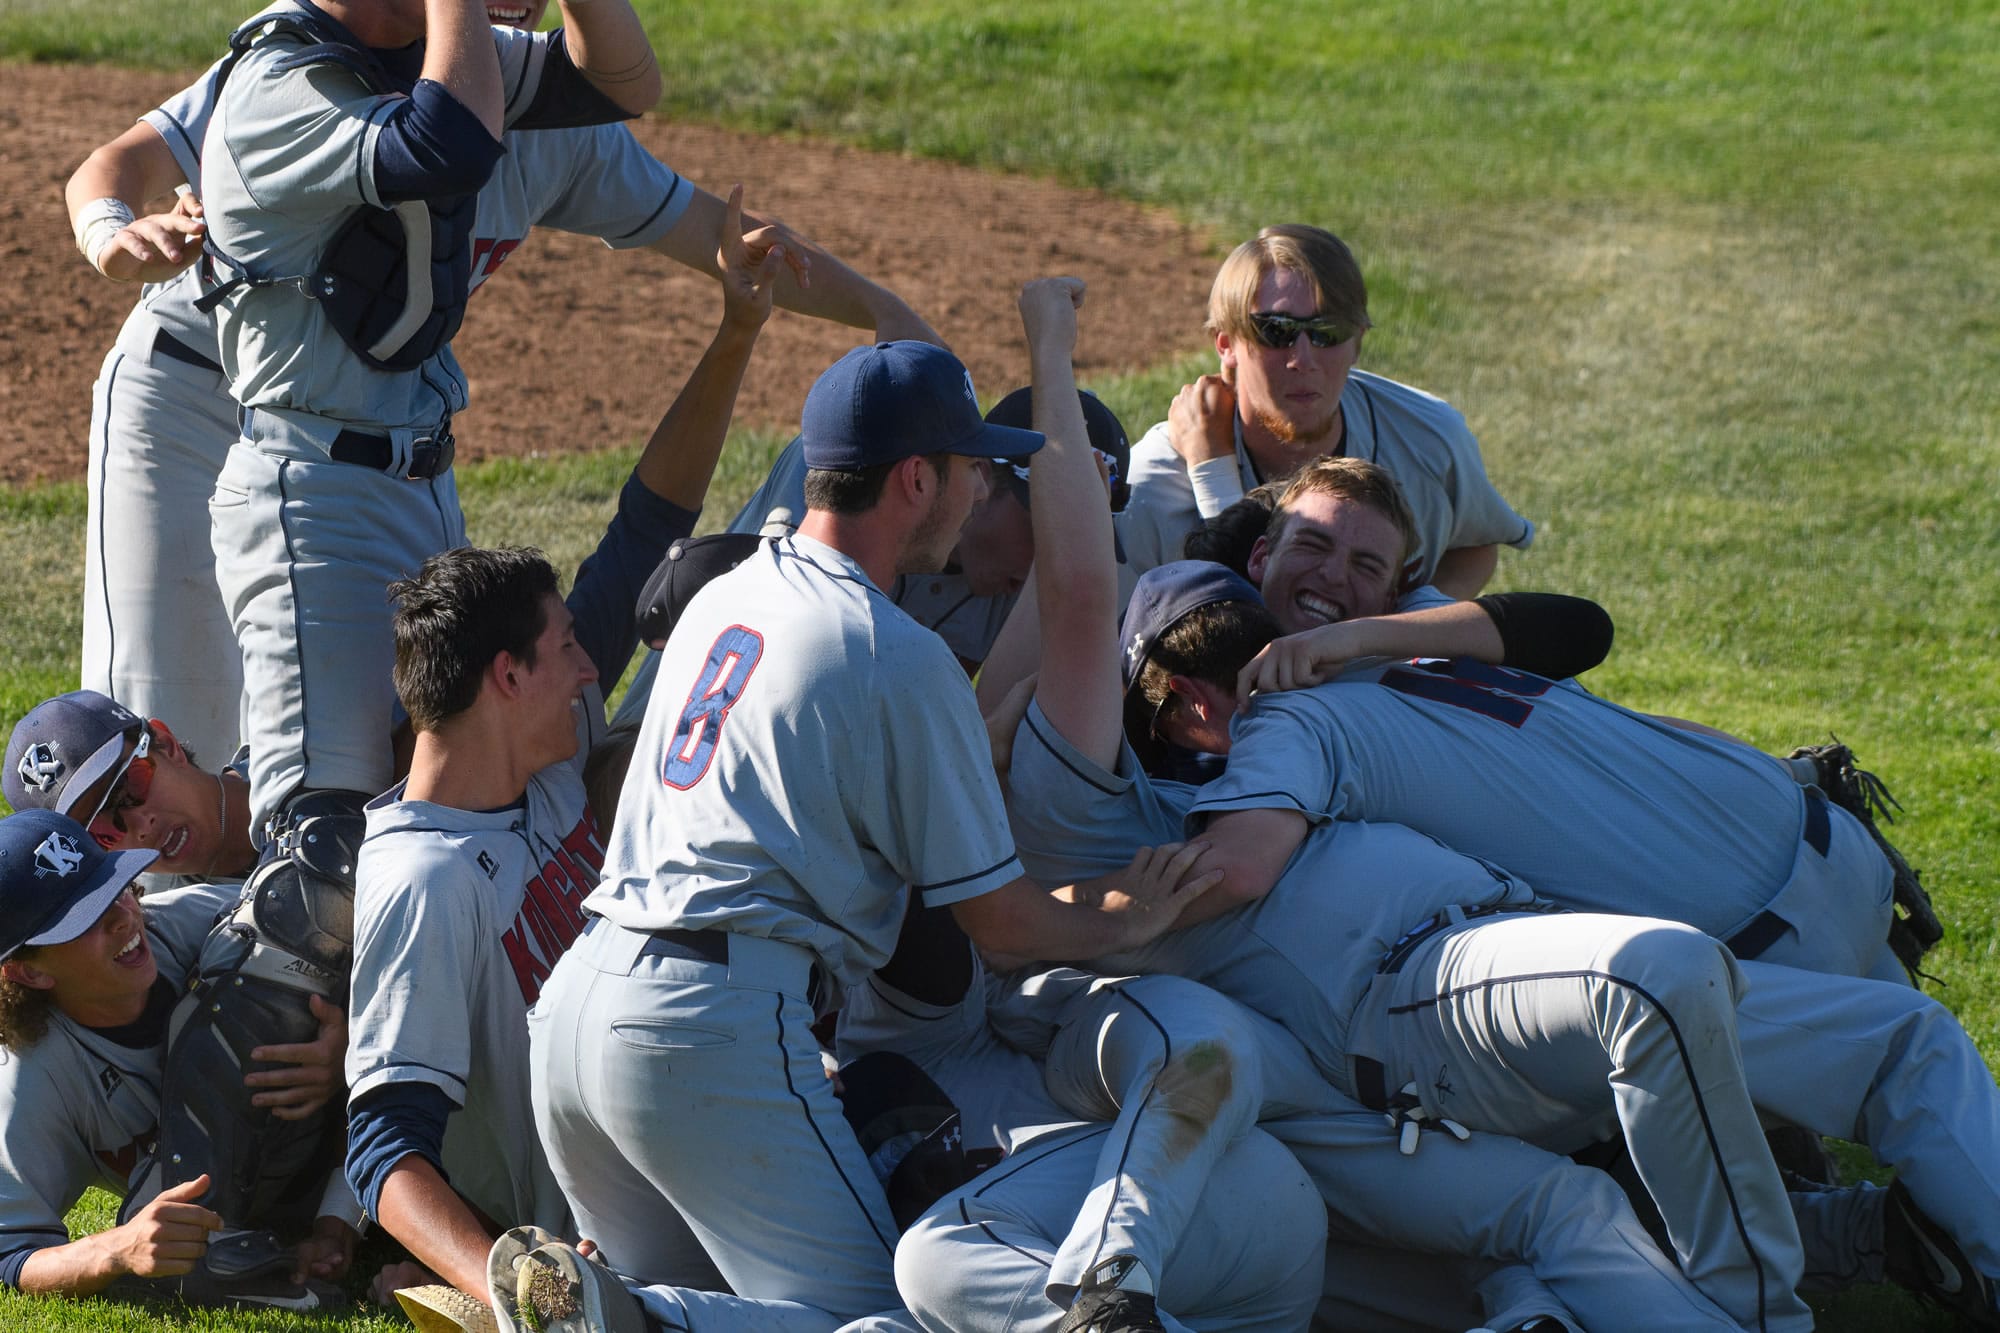 The King's Way Christian baseball team celebrates after winning the Class 1A state title with a 5-3 victory over Cedar Park Christian on Saturday in Yakima (Ken Waz/for The Columbian)